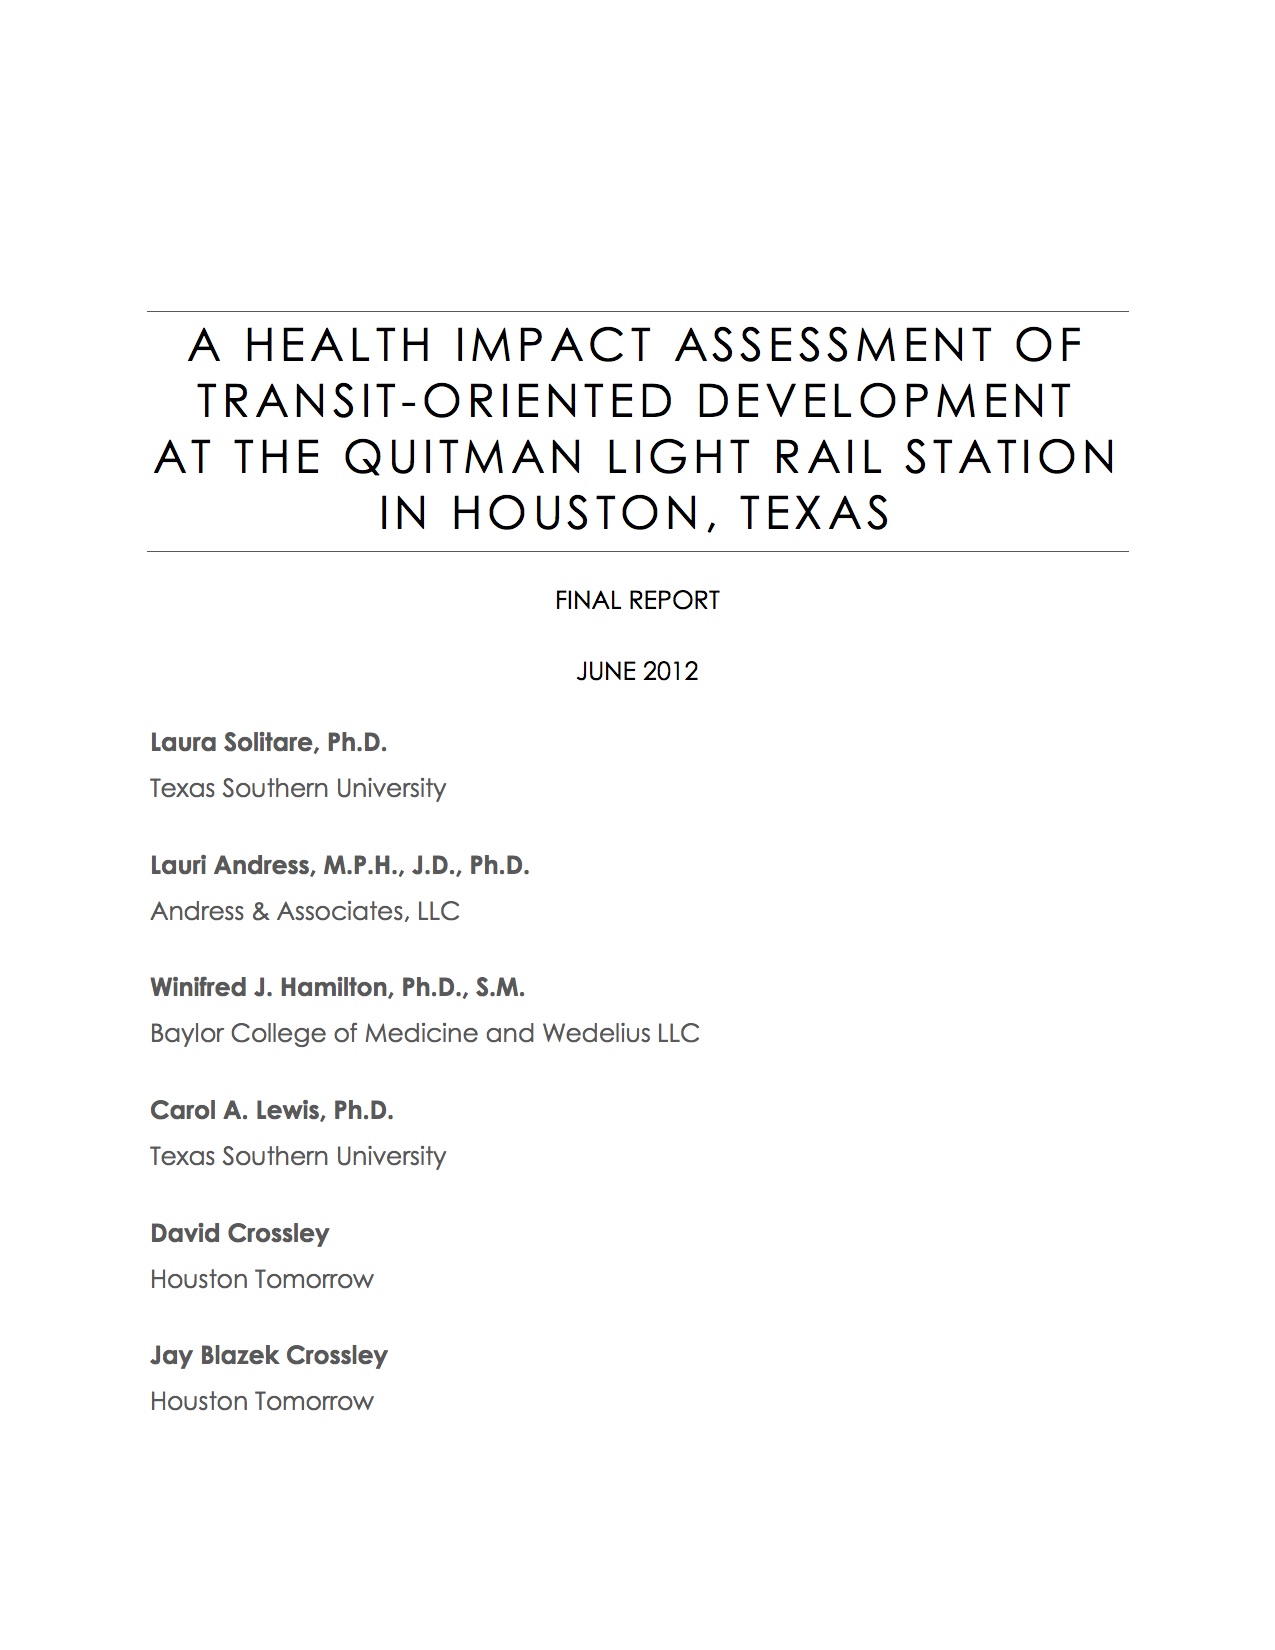 A Health Impact Assessment of Transit-Oriented Development at the Quitman Light Rail Station in Houston, Texas